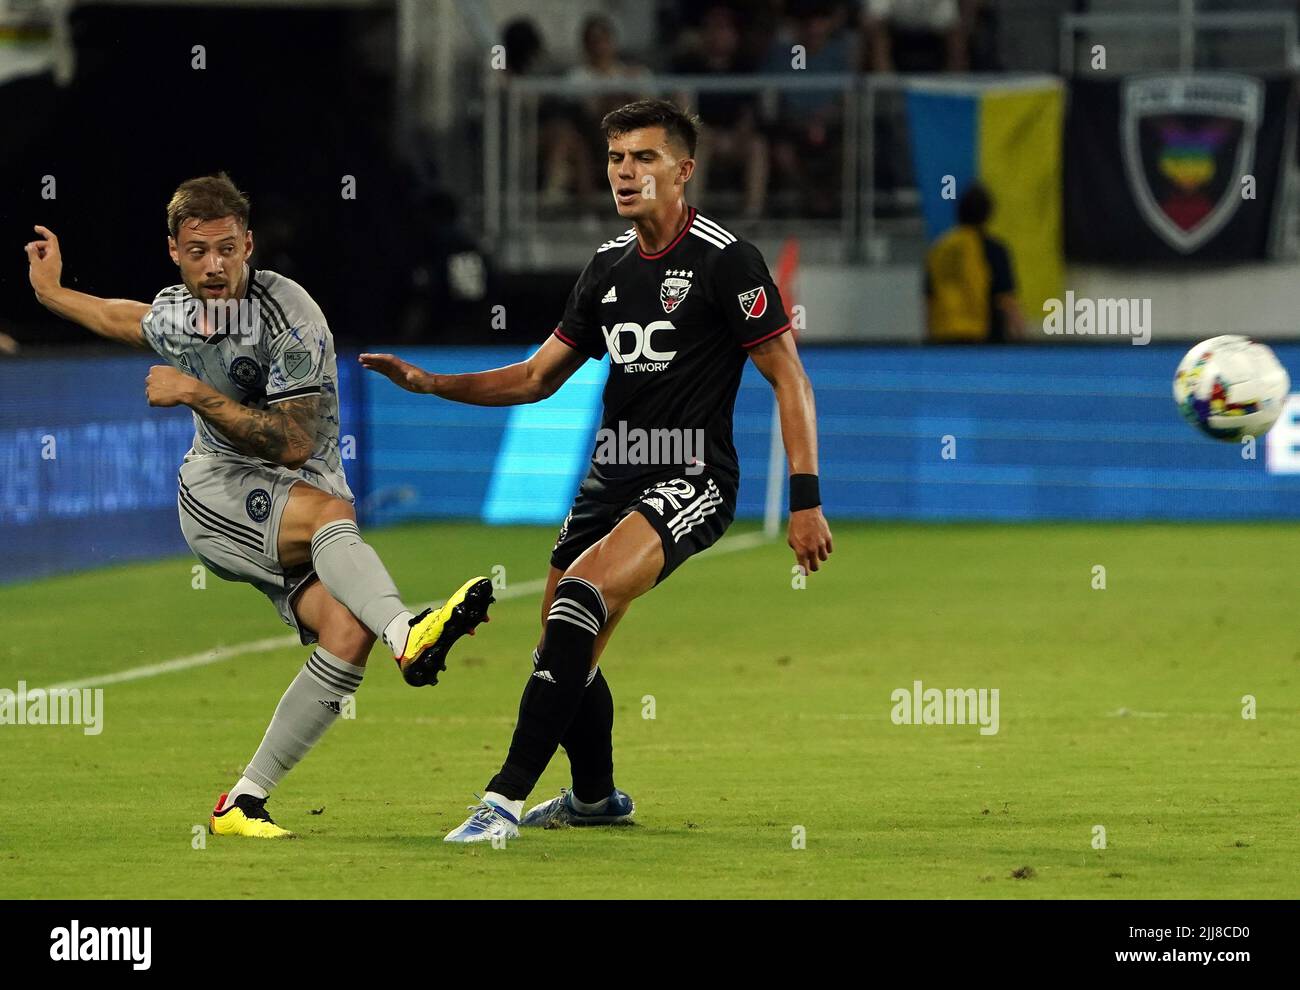 WASHINGTON, DC, USA - 23 JULY 2022: CF Montréal defender Gabriele Corbo (5) shoots past D.C. United forward Miguel Berry (22) during a MLS match between D.C United and C.F. Montreal, on July 23, 2022, at Audi Field, in Washington, DC. (Photo by Tony Quinn-Alamy Live News) Stock Photo